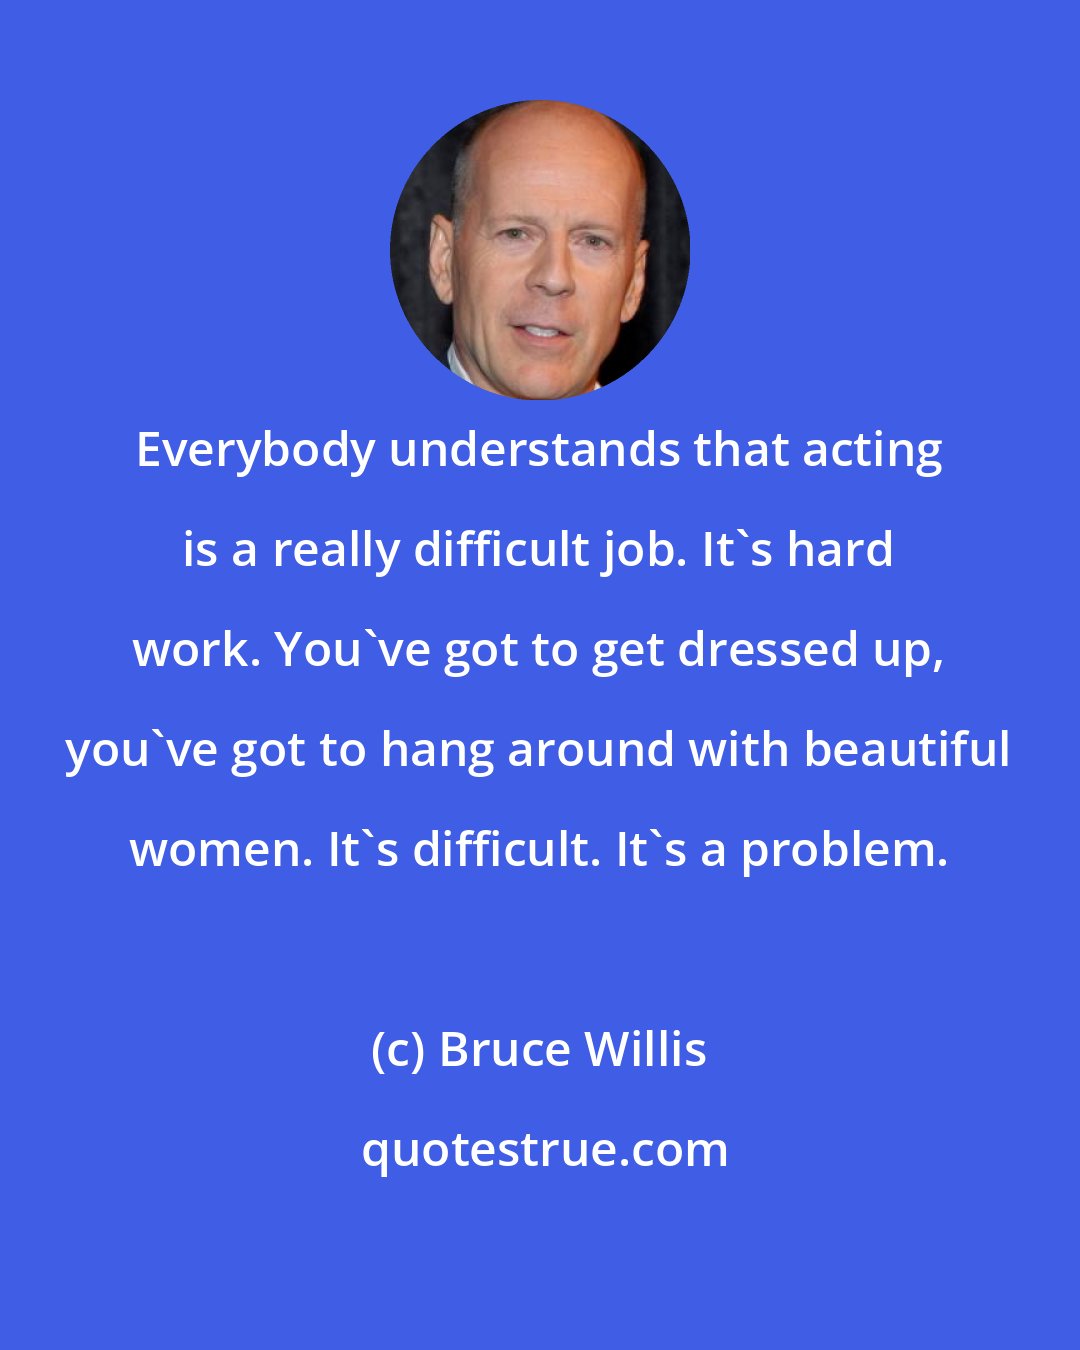 Bruce Willis: Everybody understands that acting is a really difficult job. It's hard work. You've got to get dressed up, you've got to hang around with beautiful women. It's difficult. It's a problem.